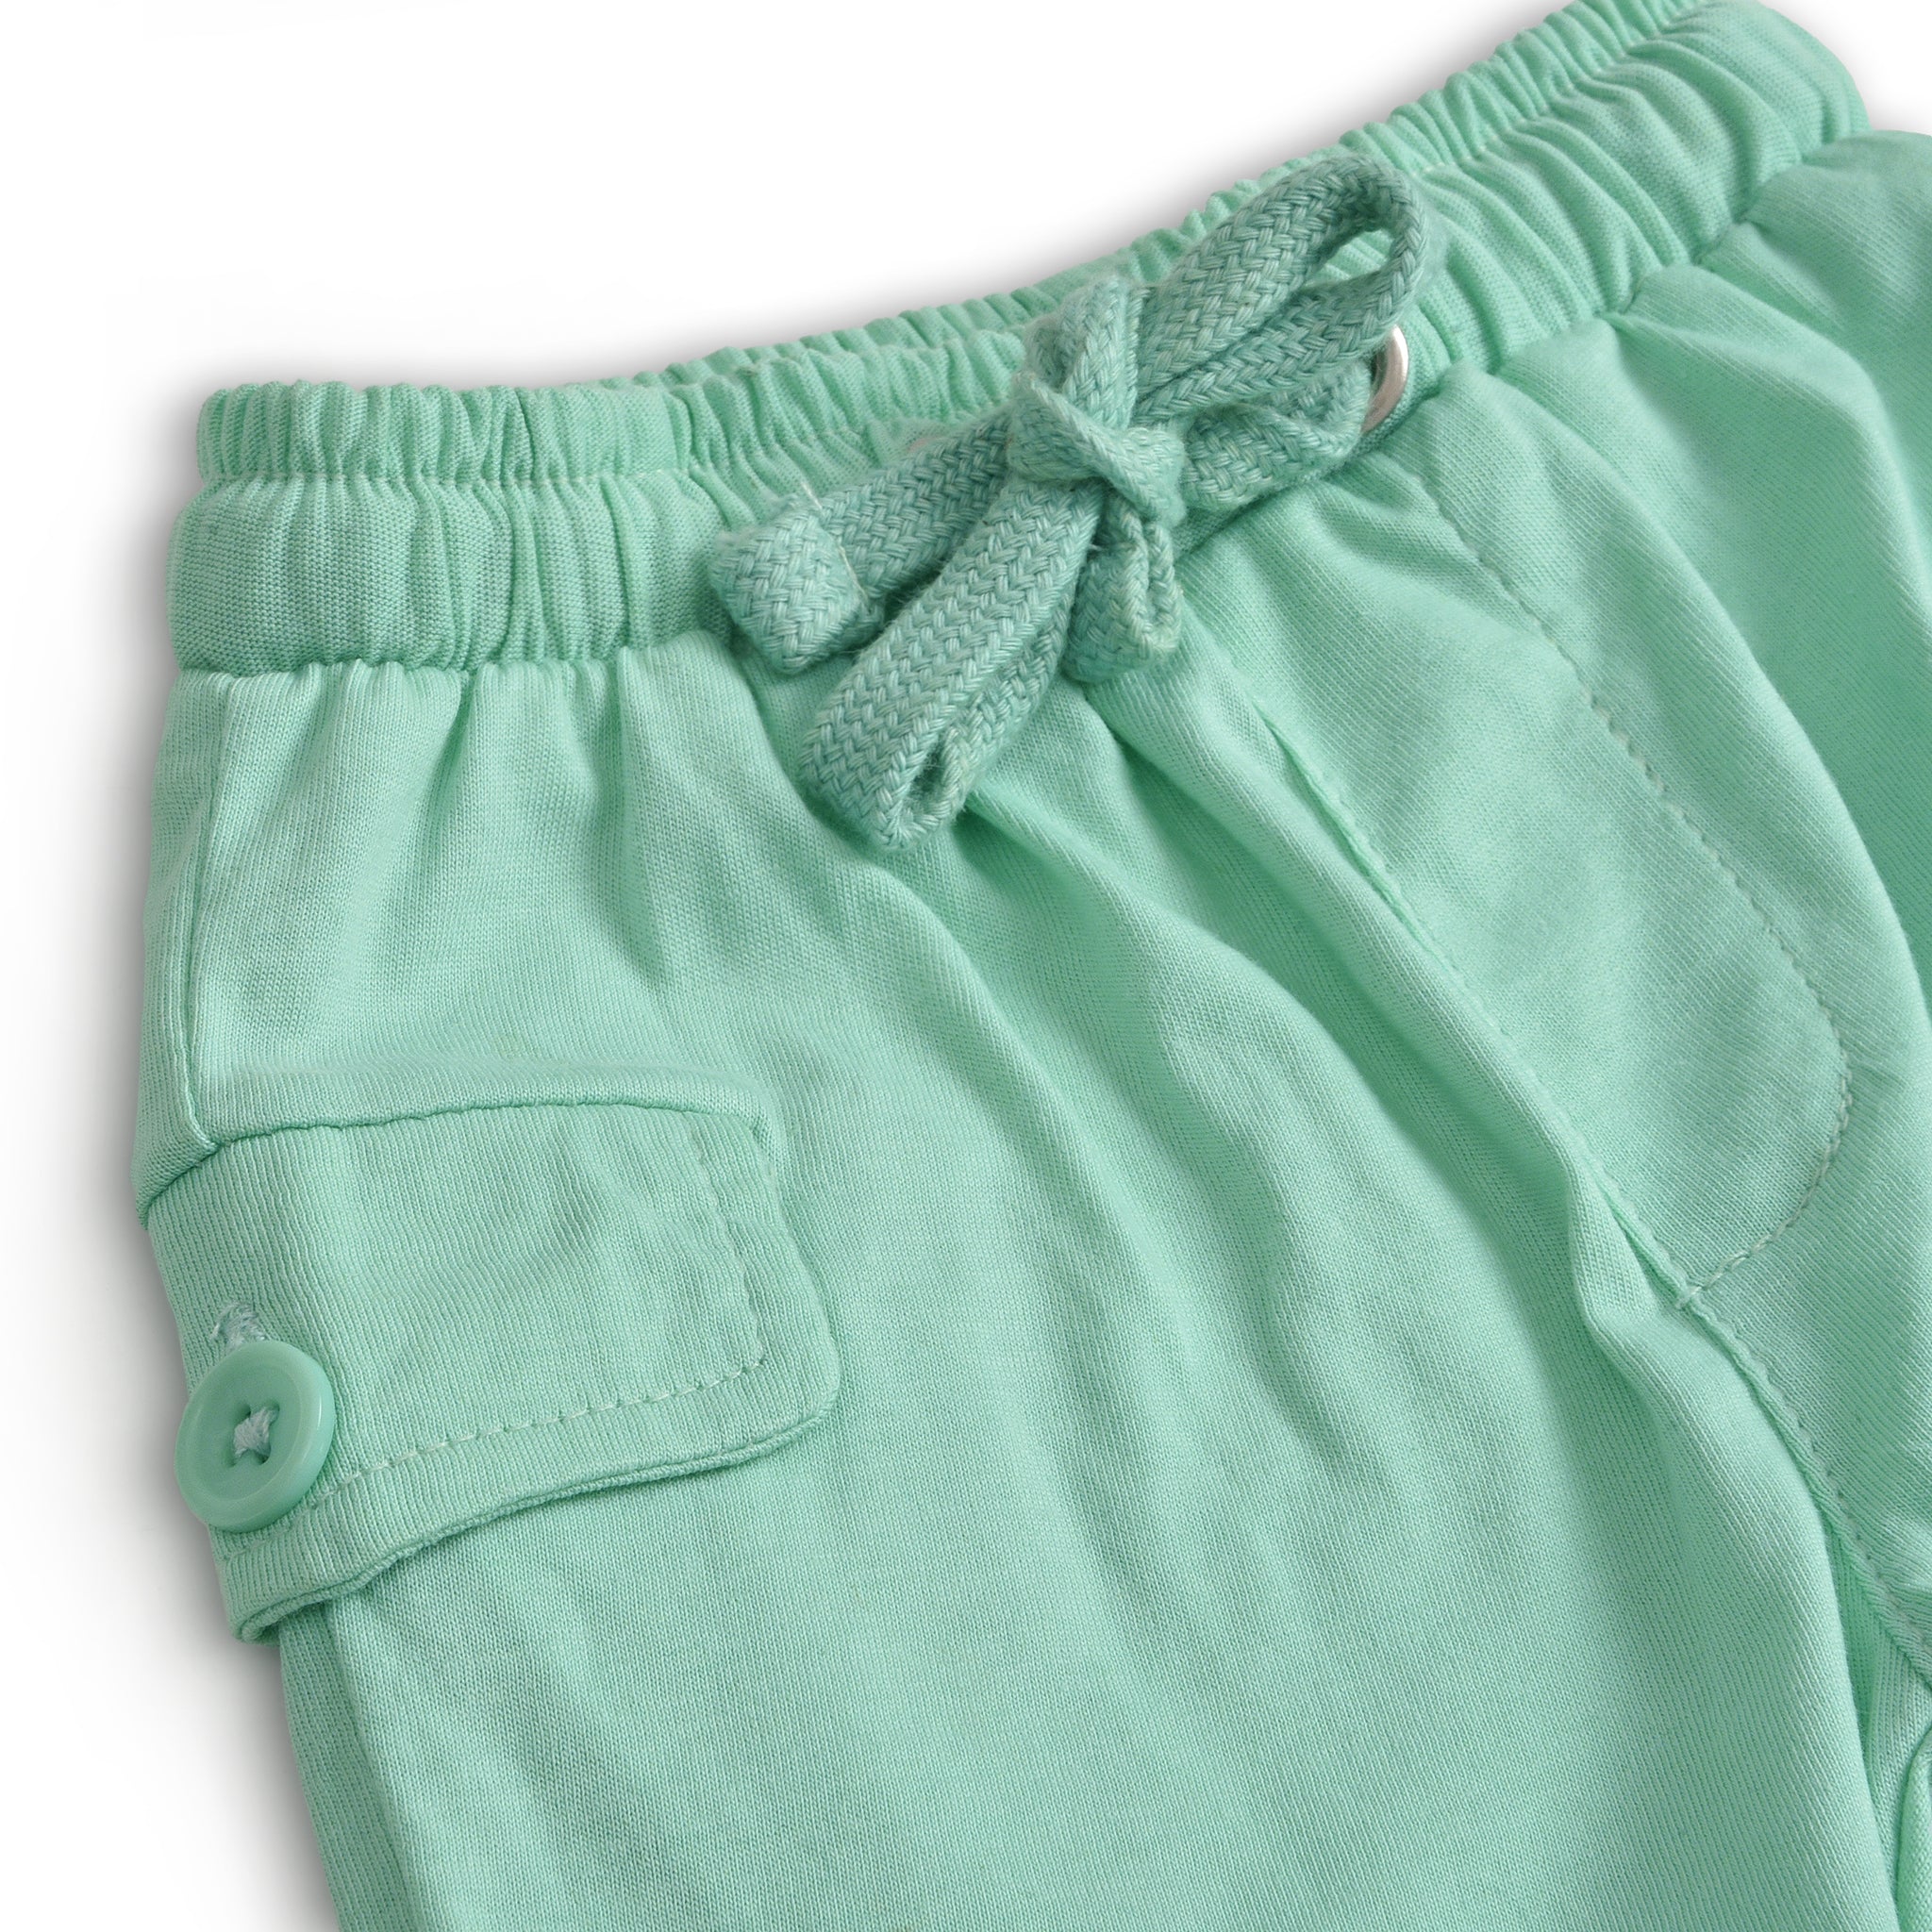 Sea Green Knitted Shorts